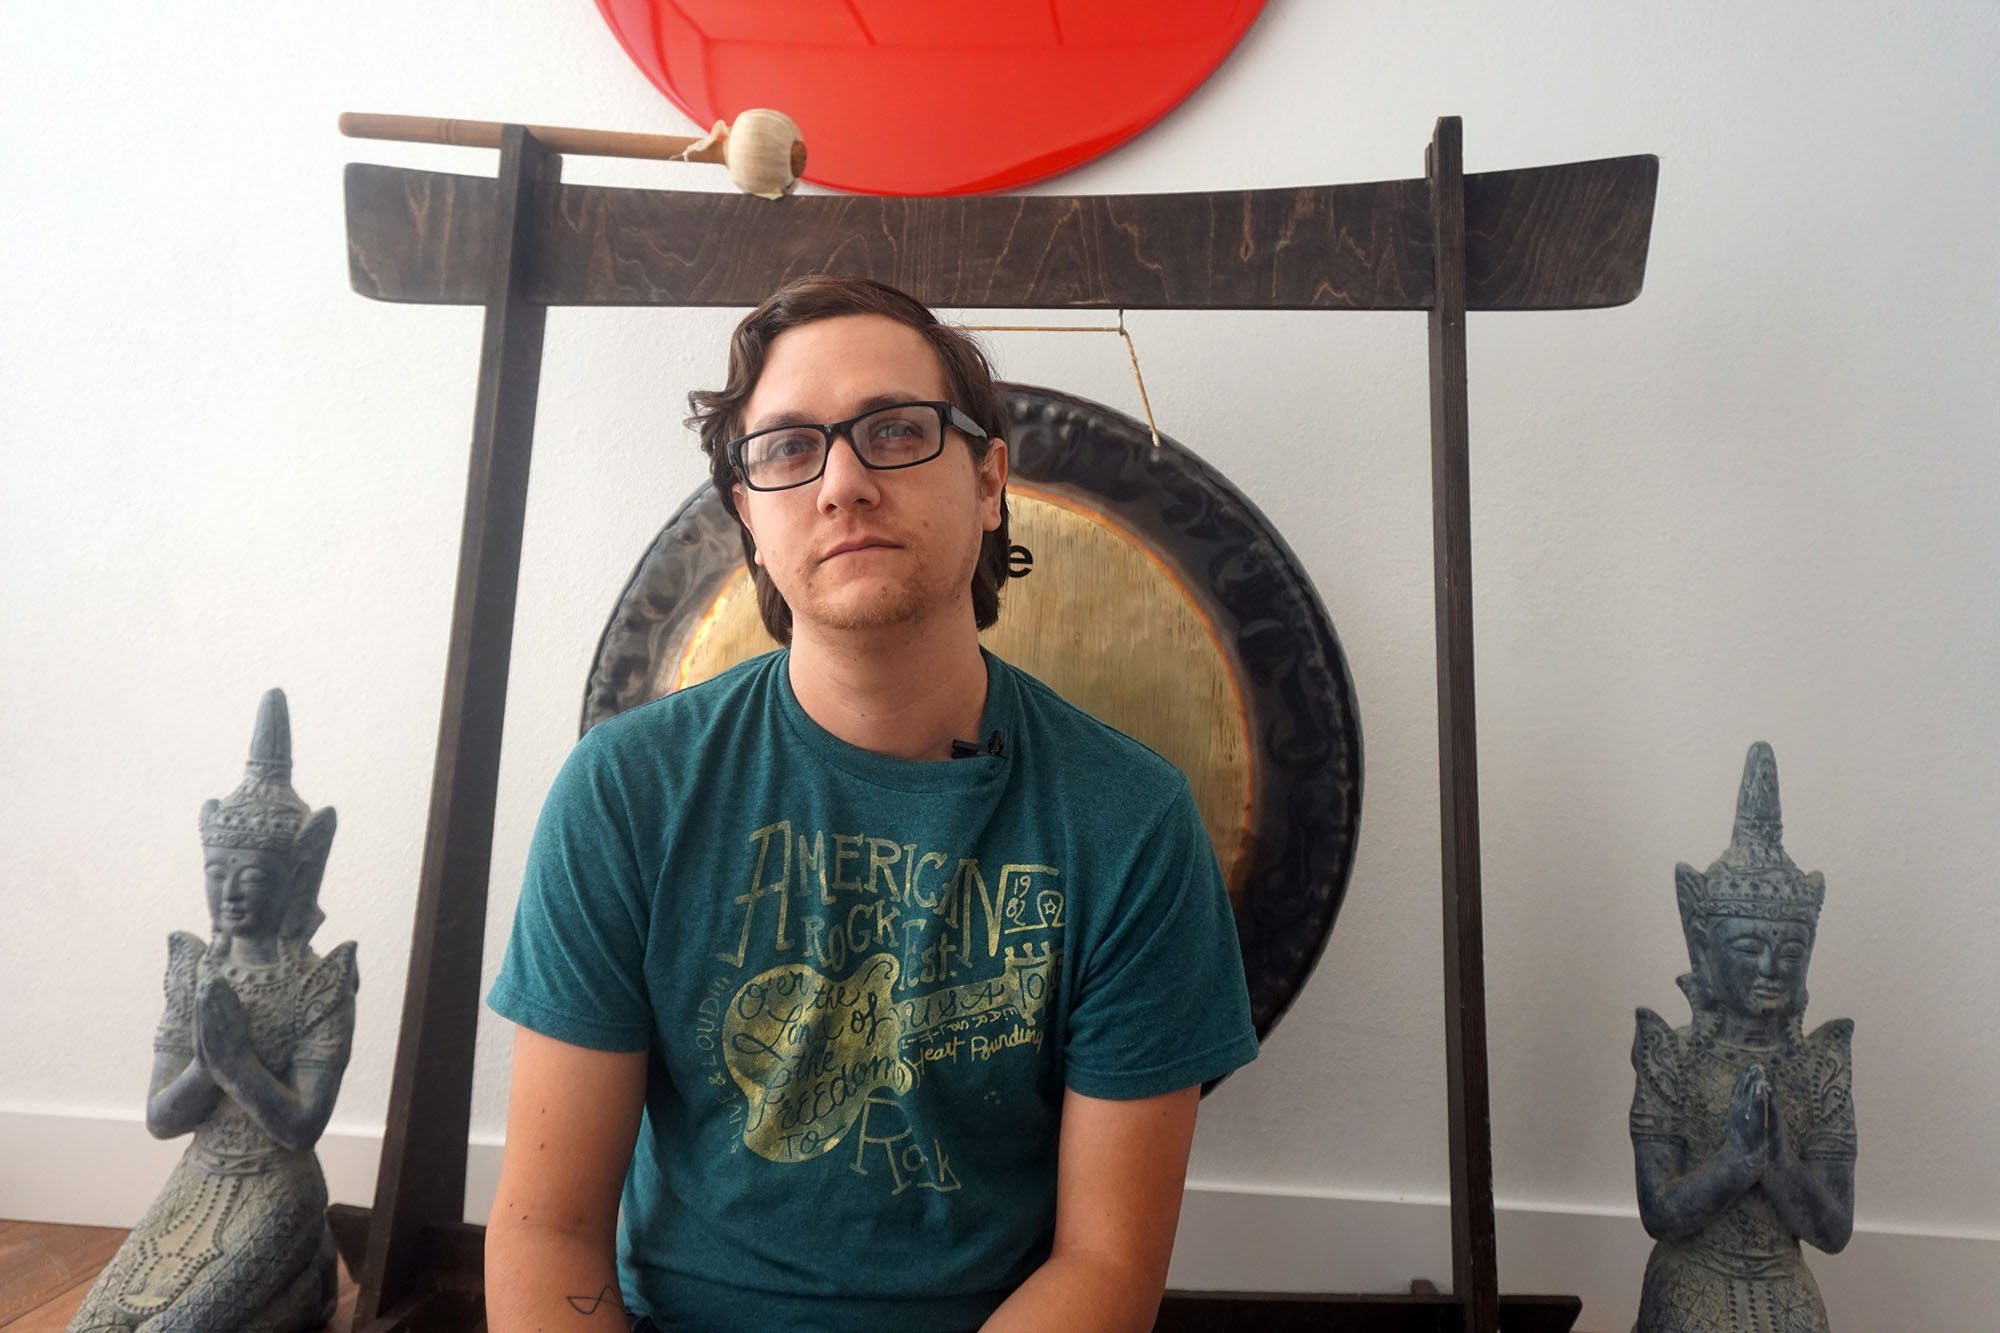 This is a photo of a man, Mitchell Maldonado. He is seated in front of a gong and a wall with a shiny red circle that is made to look like the flag of Japan. Mitchell is wearing glasses. He looks proud.